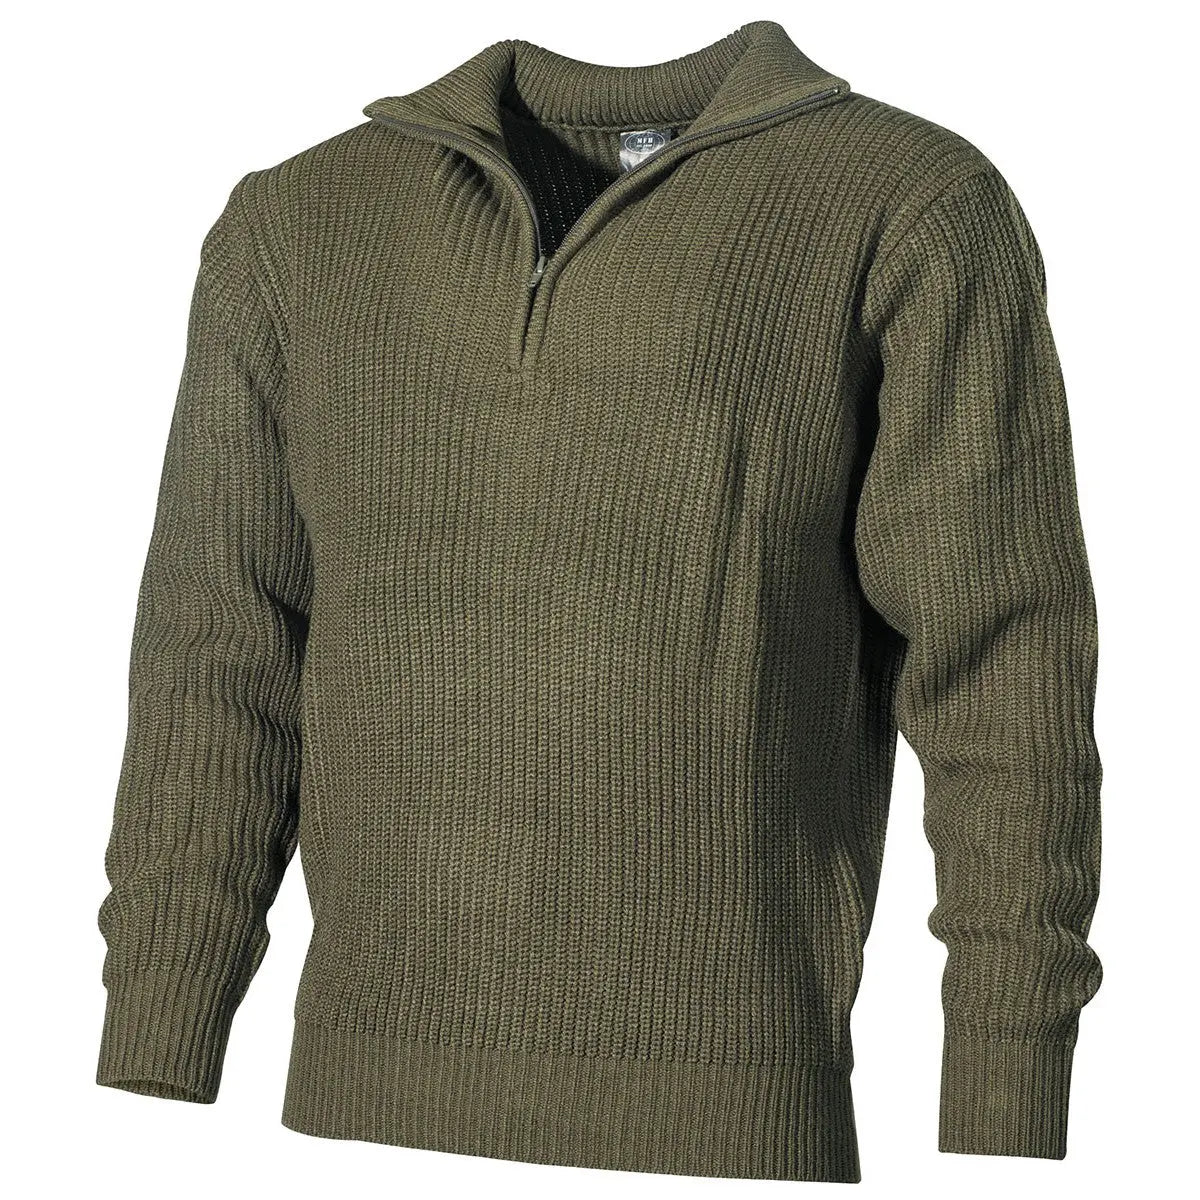 Pullover, "Troyer", OD green, with zip NSO Gear